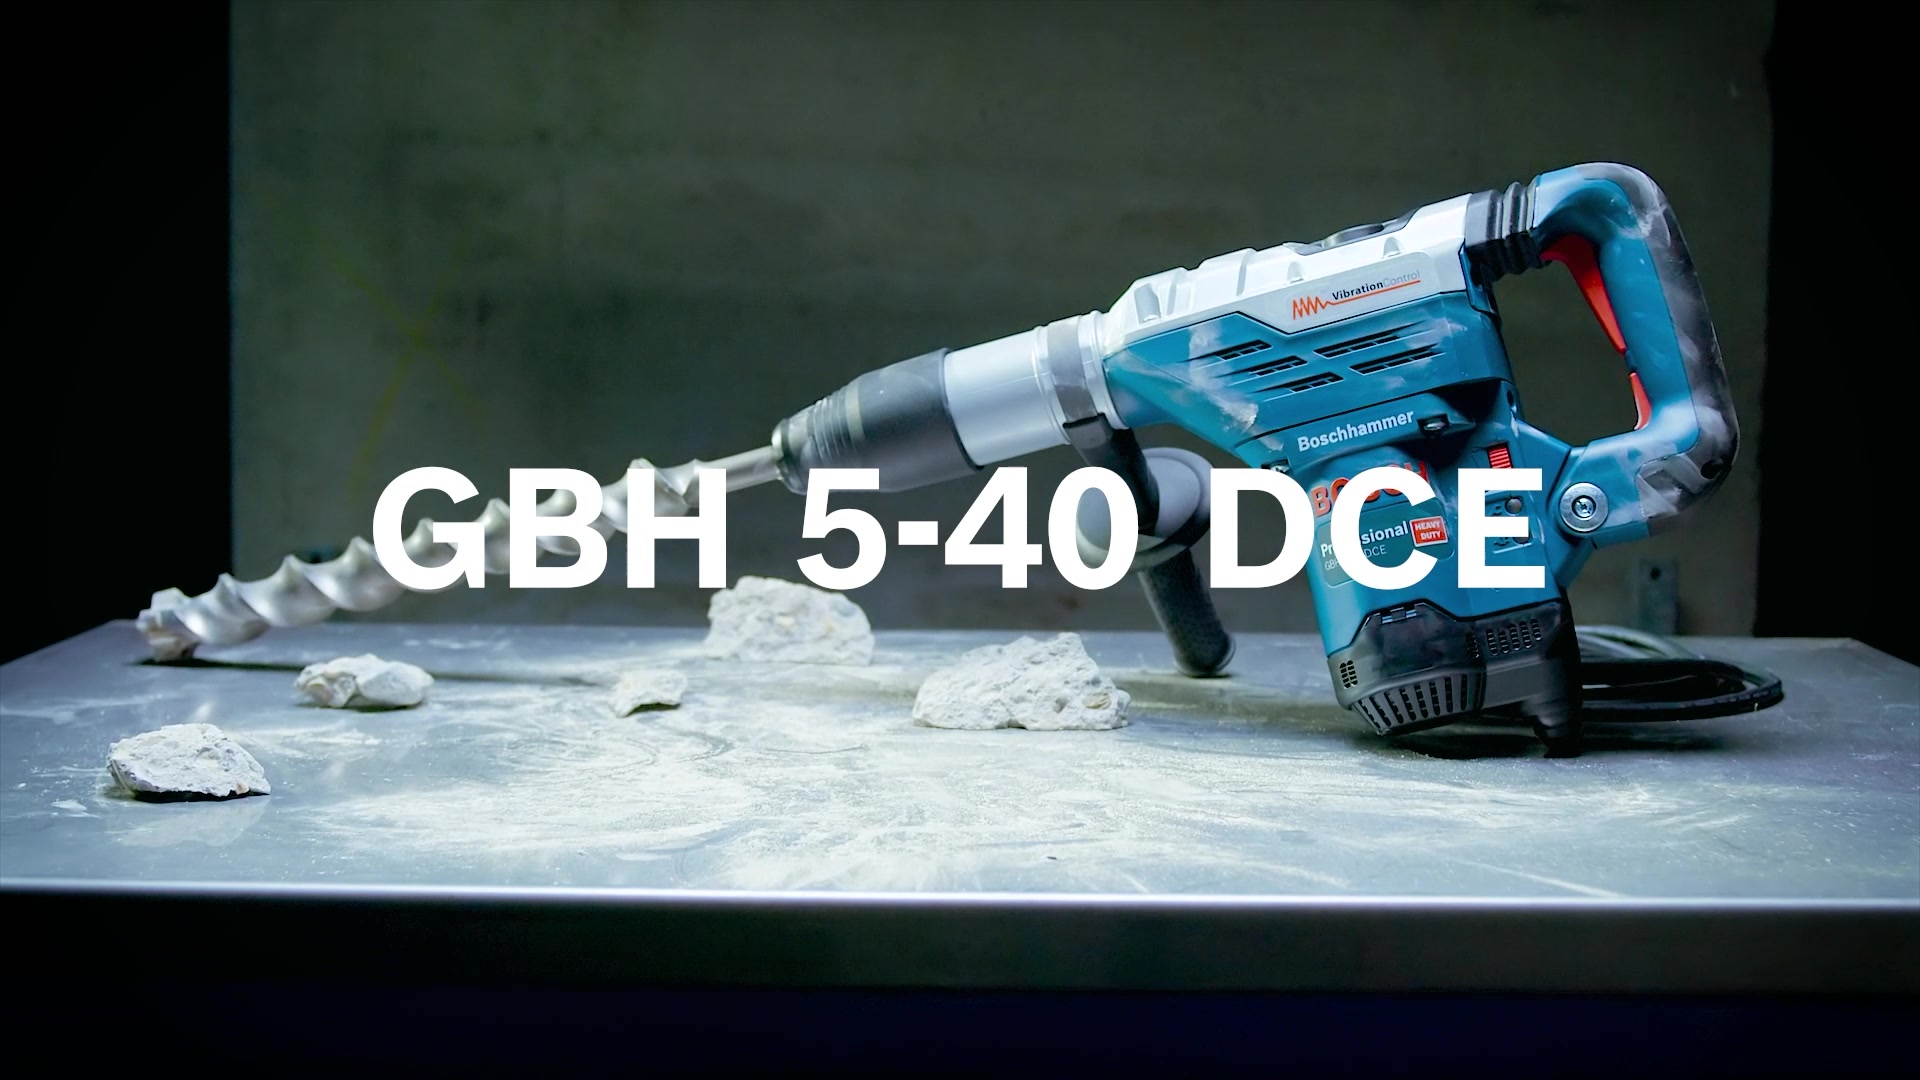 GBH max SDS Bosch DCE Rotary Professional 5-40 Hammer with |